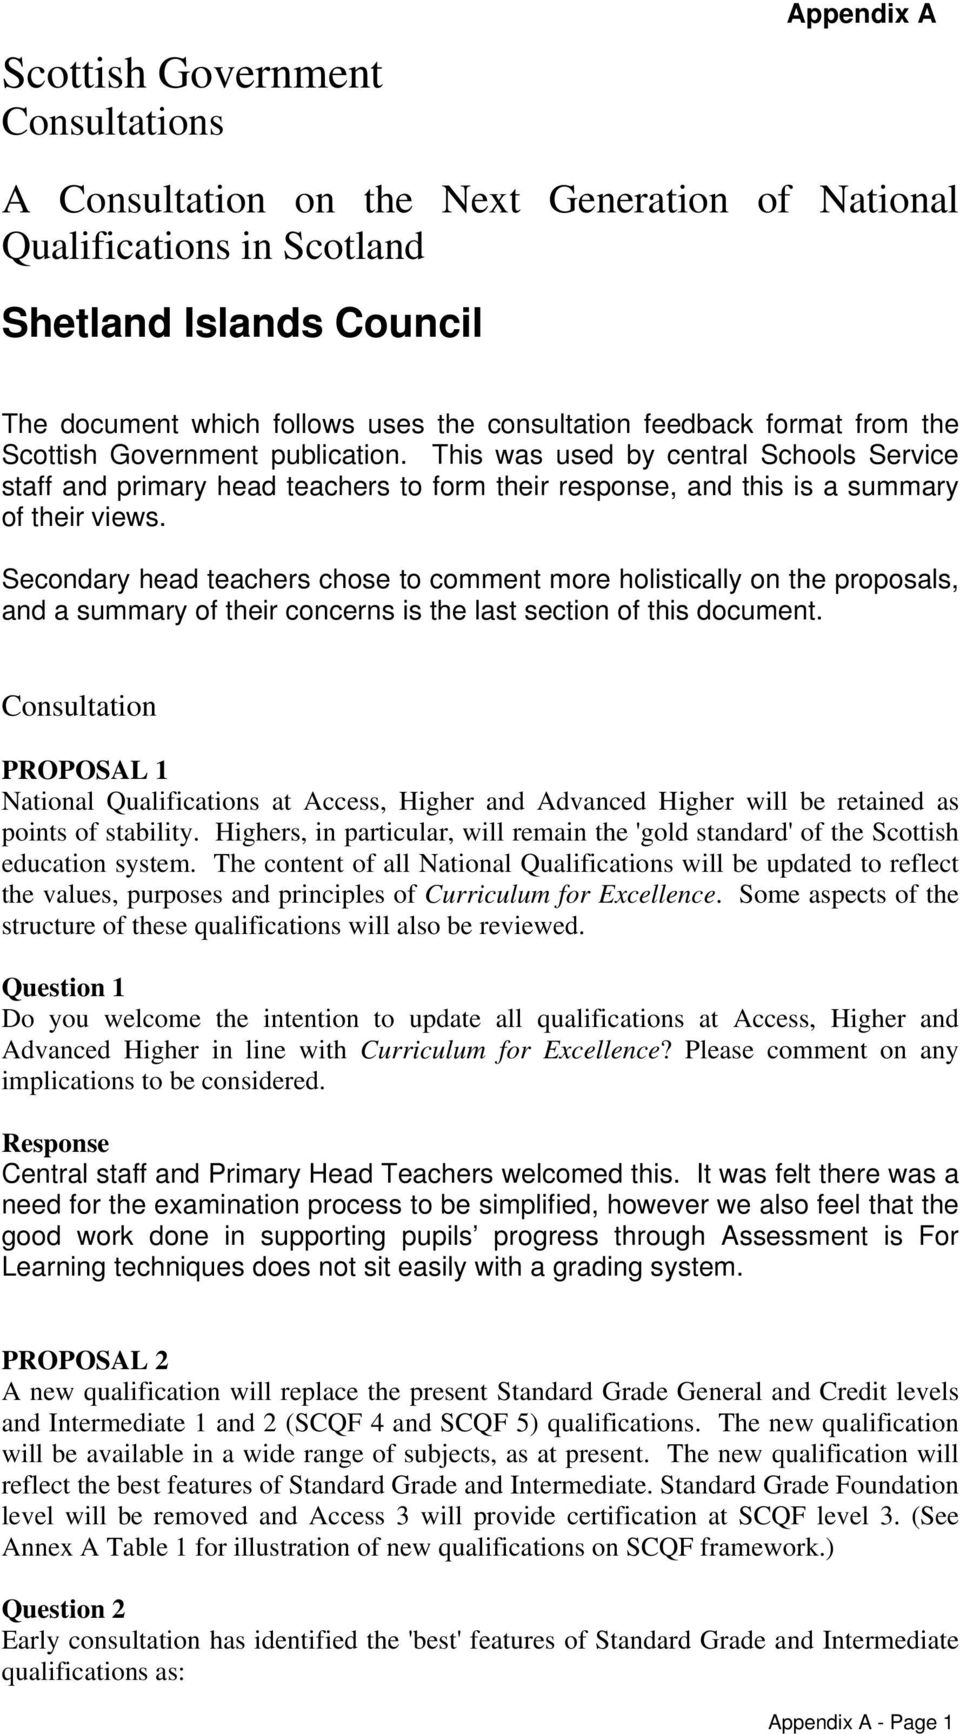 Secondary head teachers chose to comment more holistically on the proposals, and a summary of their concerns is the last section of this document.